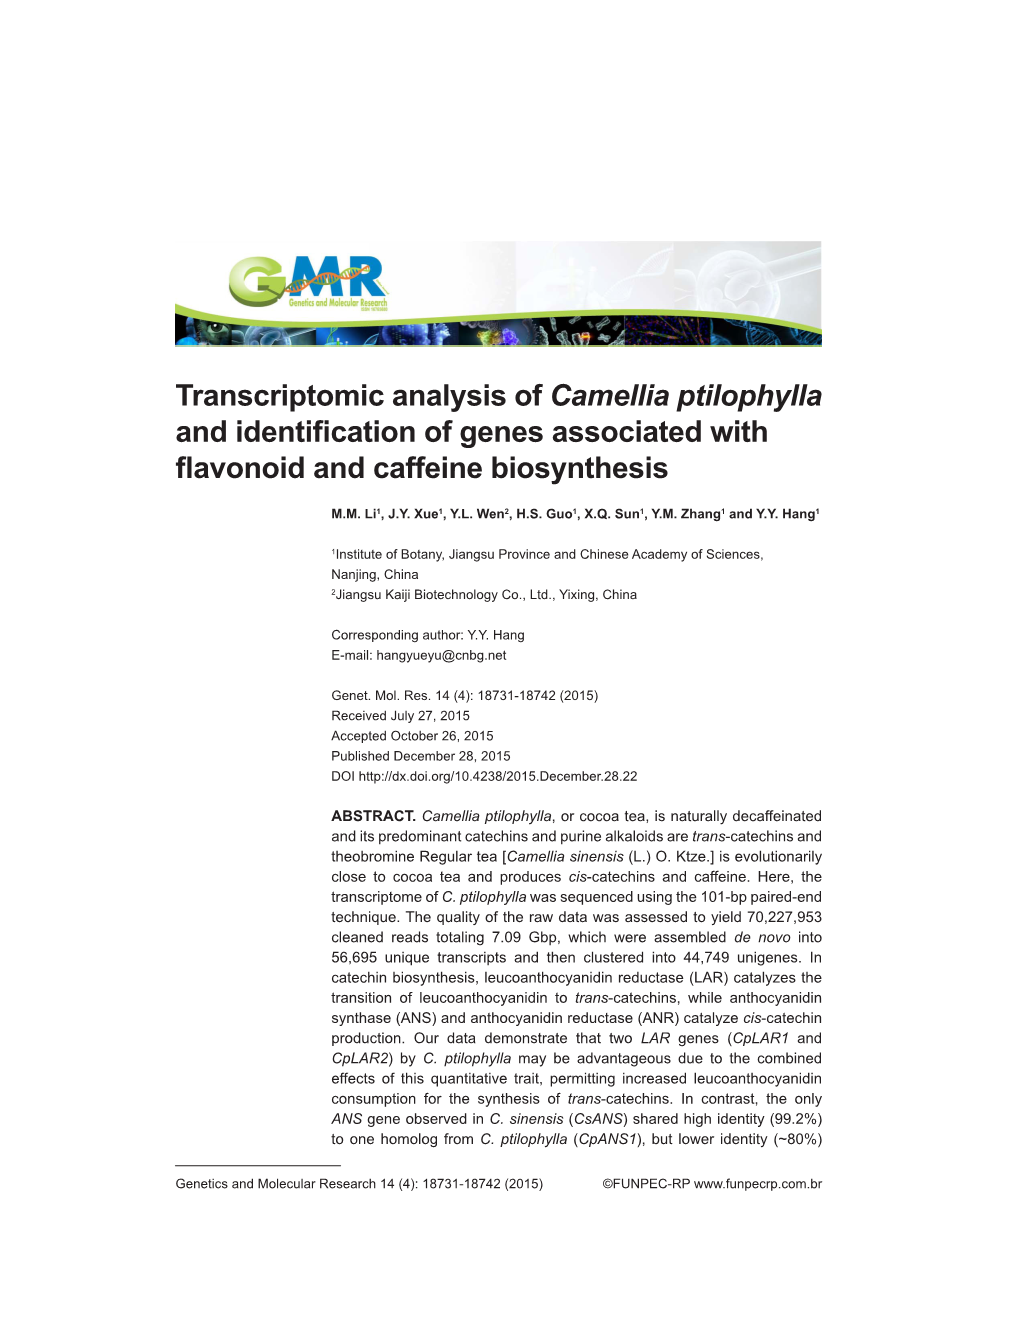 Transcriptomic Analysis of Camellia Ptilophylla and Identification of Genes Associated with Flavonoid and Caffeine Biosynthesis